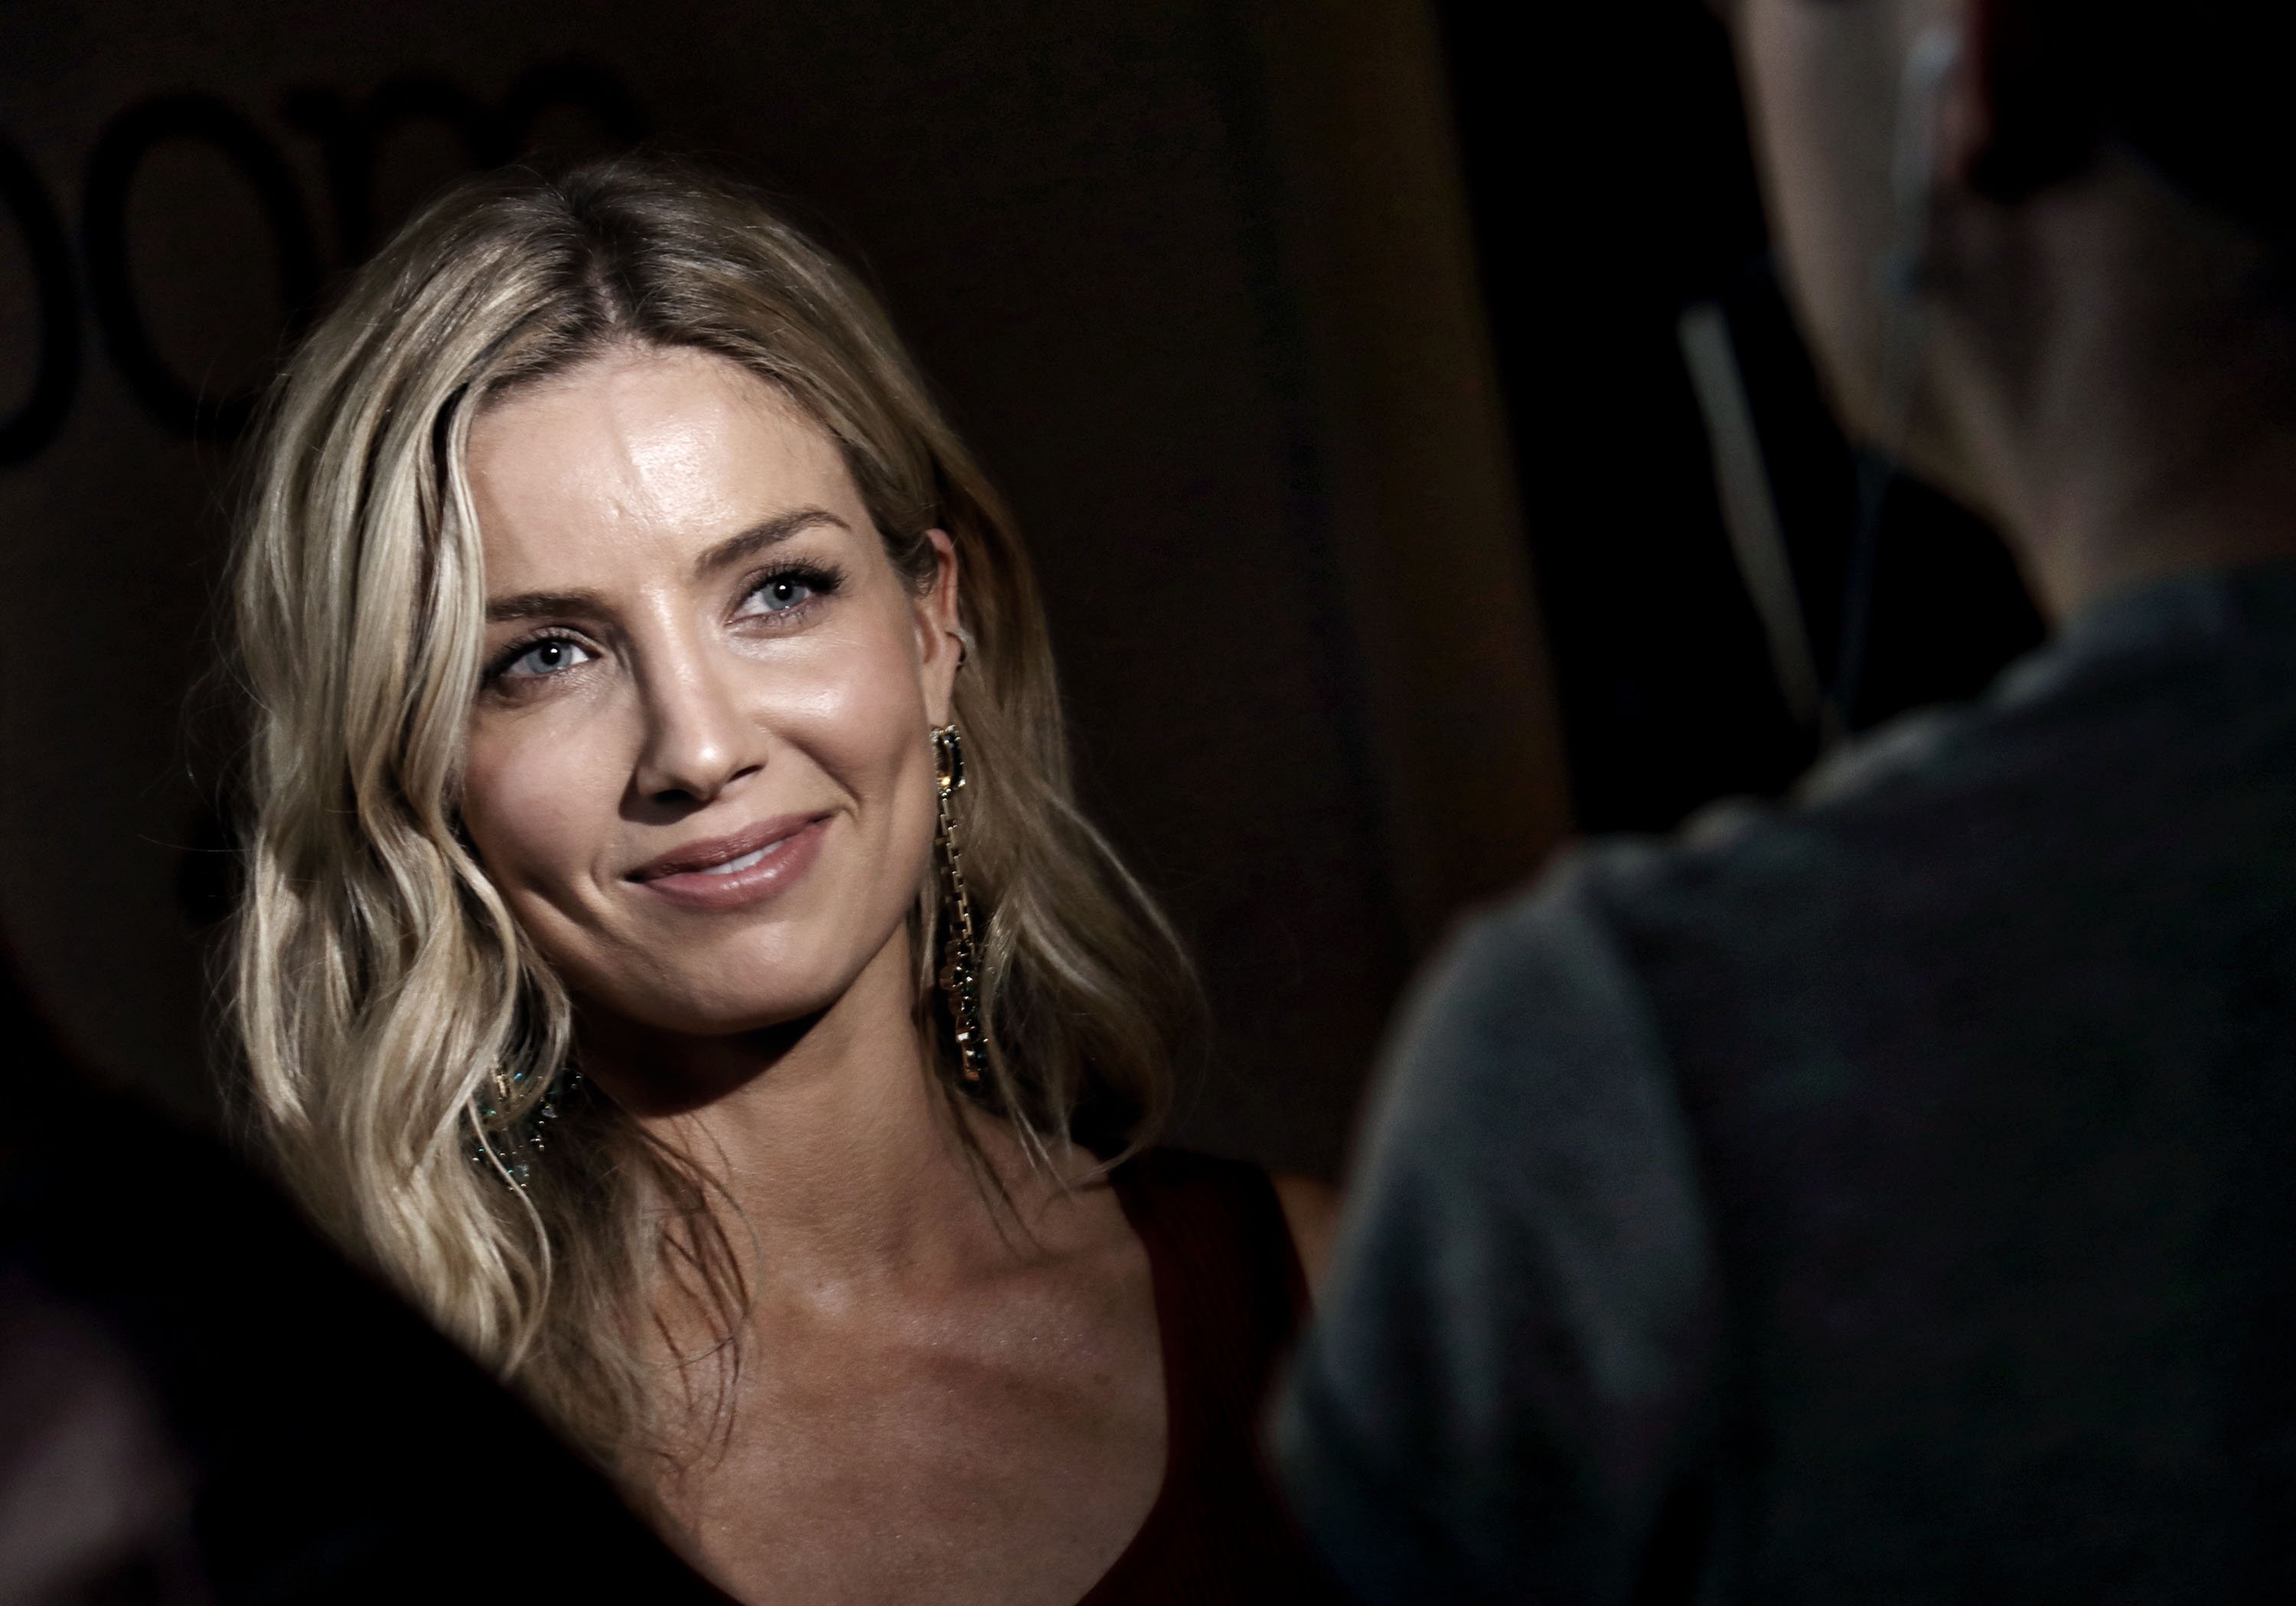 Annabelle Wallis smiles for a close up photo wearing long earrings.